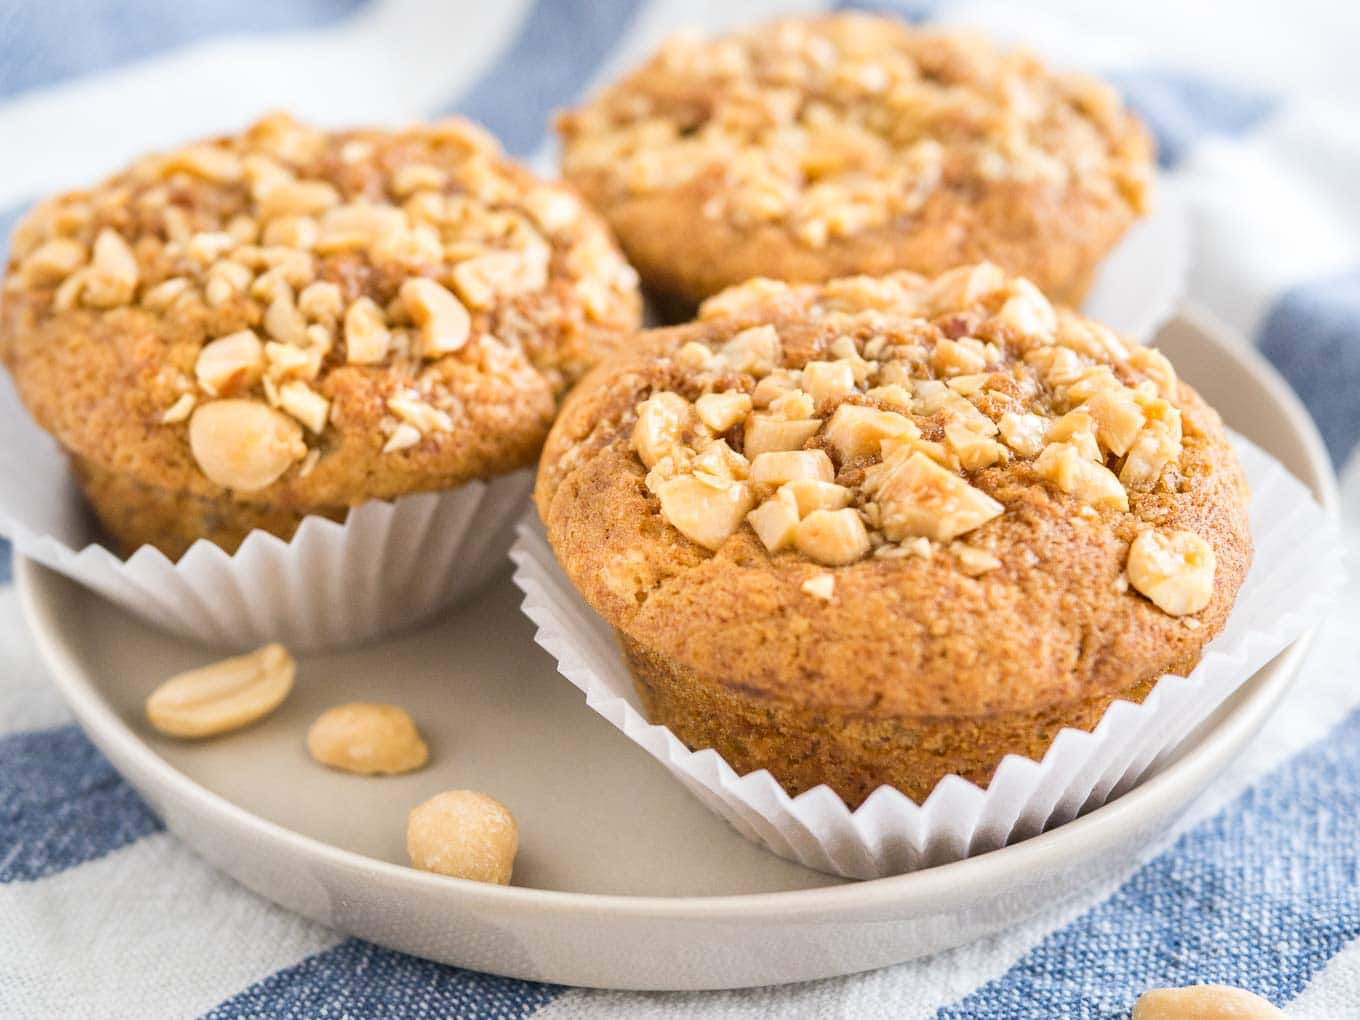 3 peanut butter banana muffins, topped with peanuts with their liners opened on a grey plate on a white and blue dishtowel.